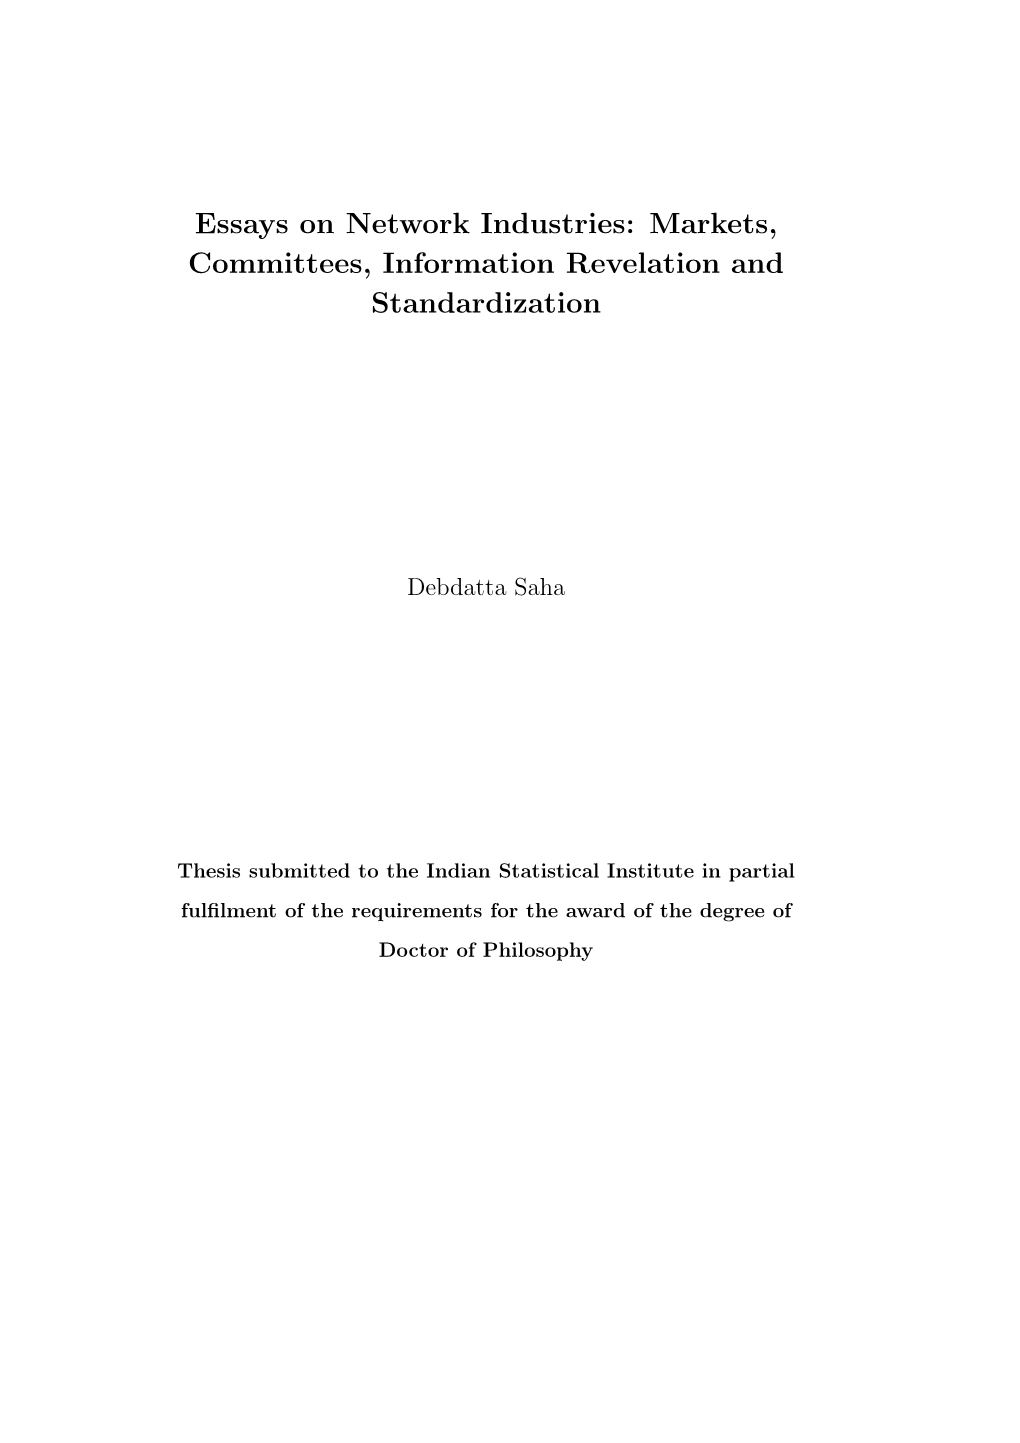 Essays on Network Industries: Markets, Committees, Information Revelation and Standardization